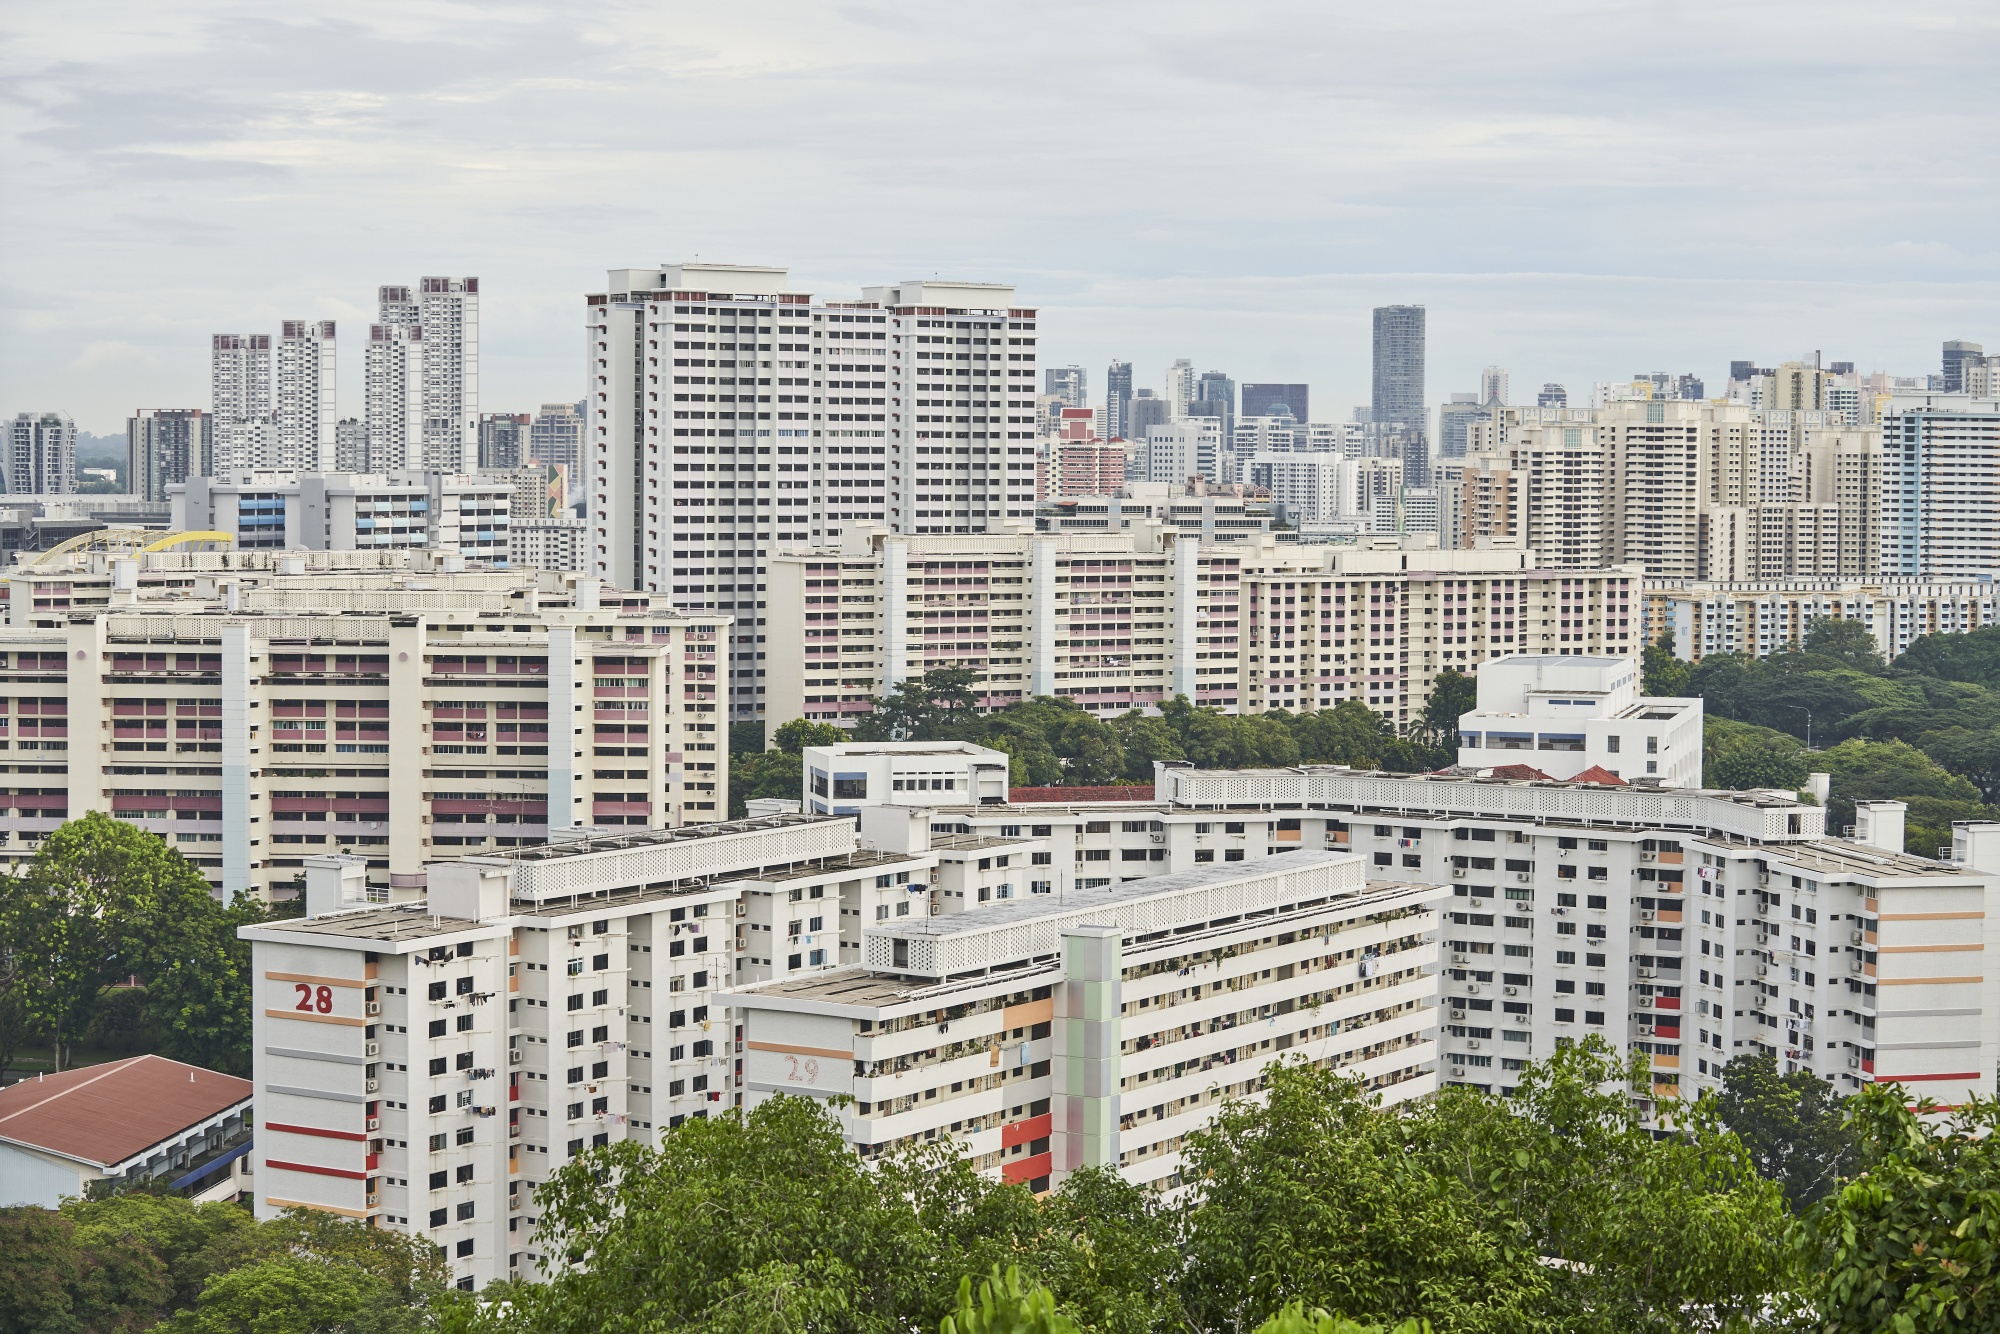 Singapore Home Price Growth Quickens, Stoking Worries of Curbs